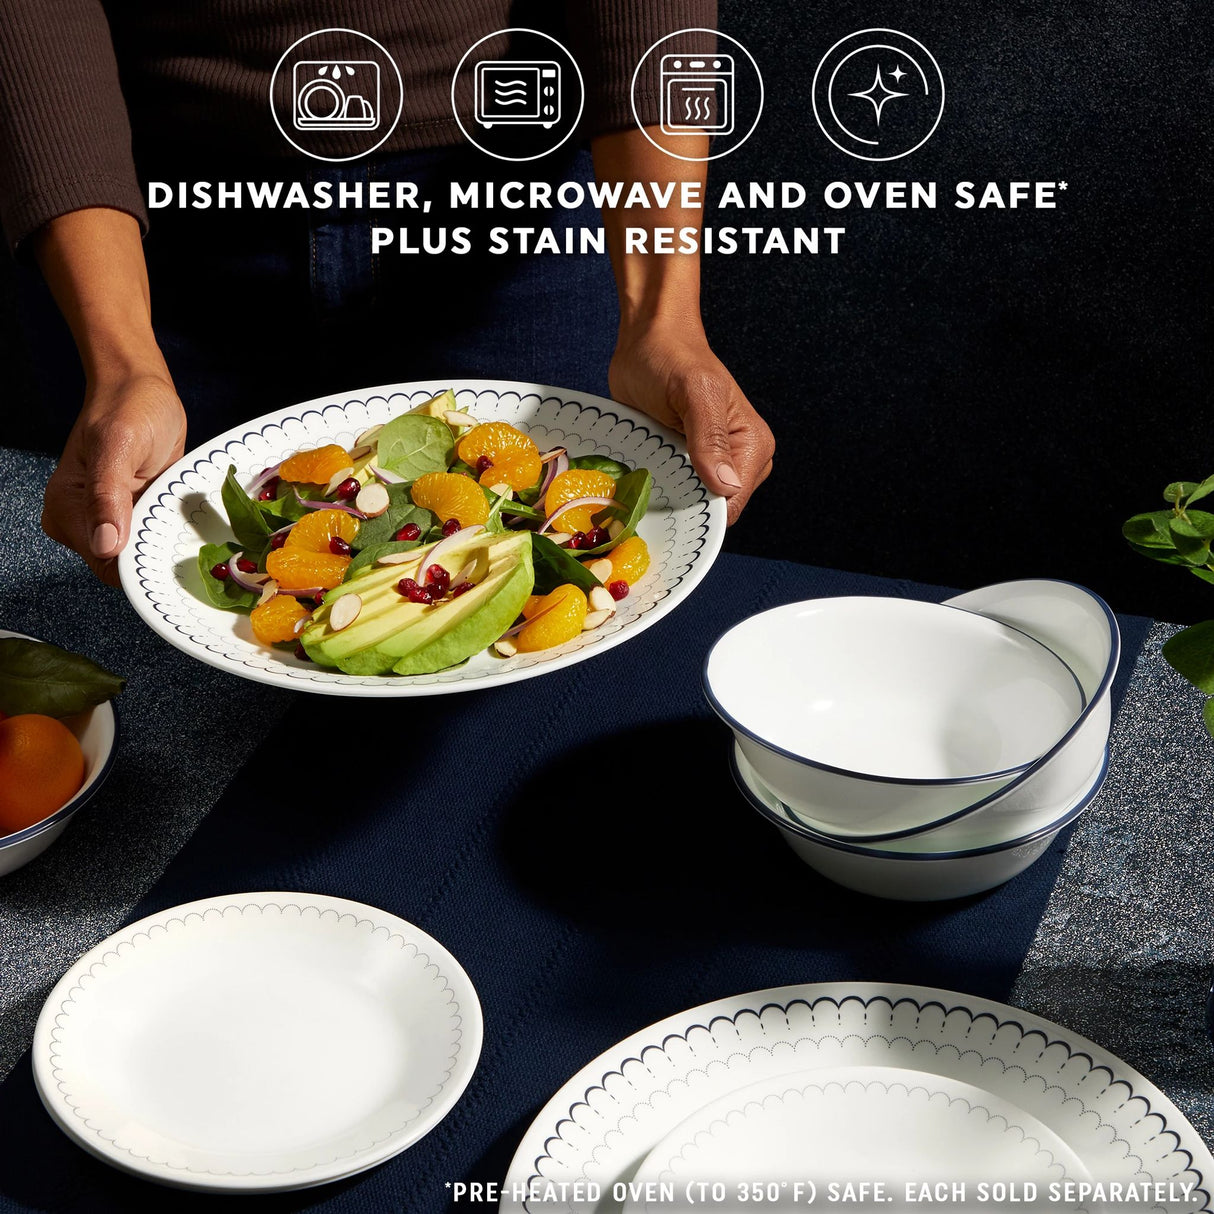  Caspian Lace dinnerware on tabletop with text dishwasher, microwave and oven safe plus stain resistant